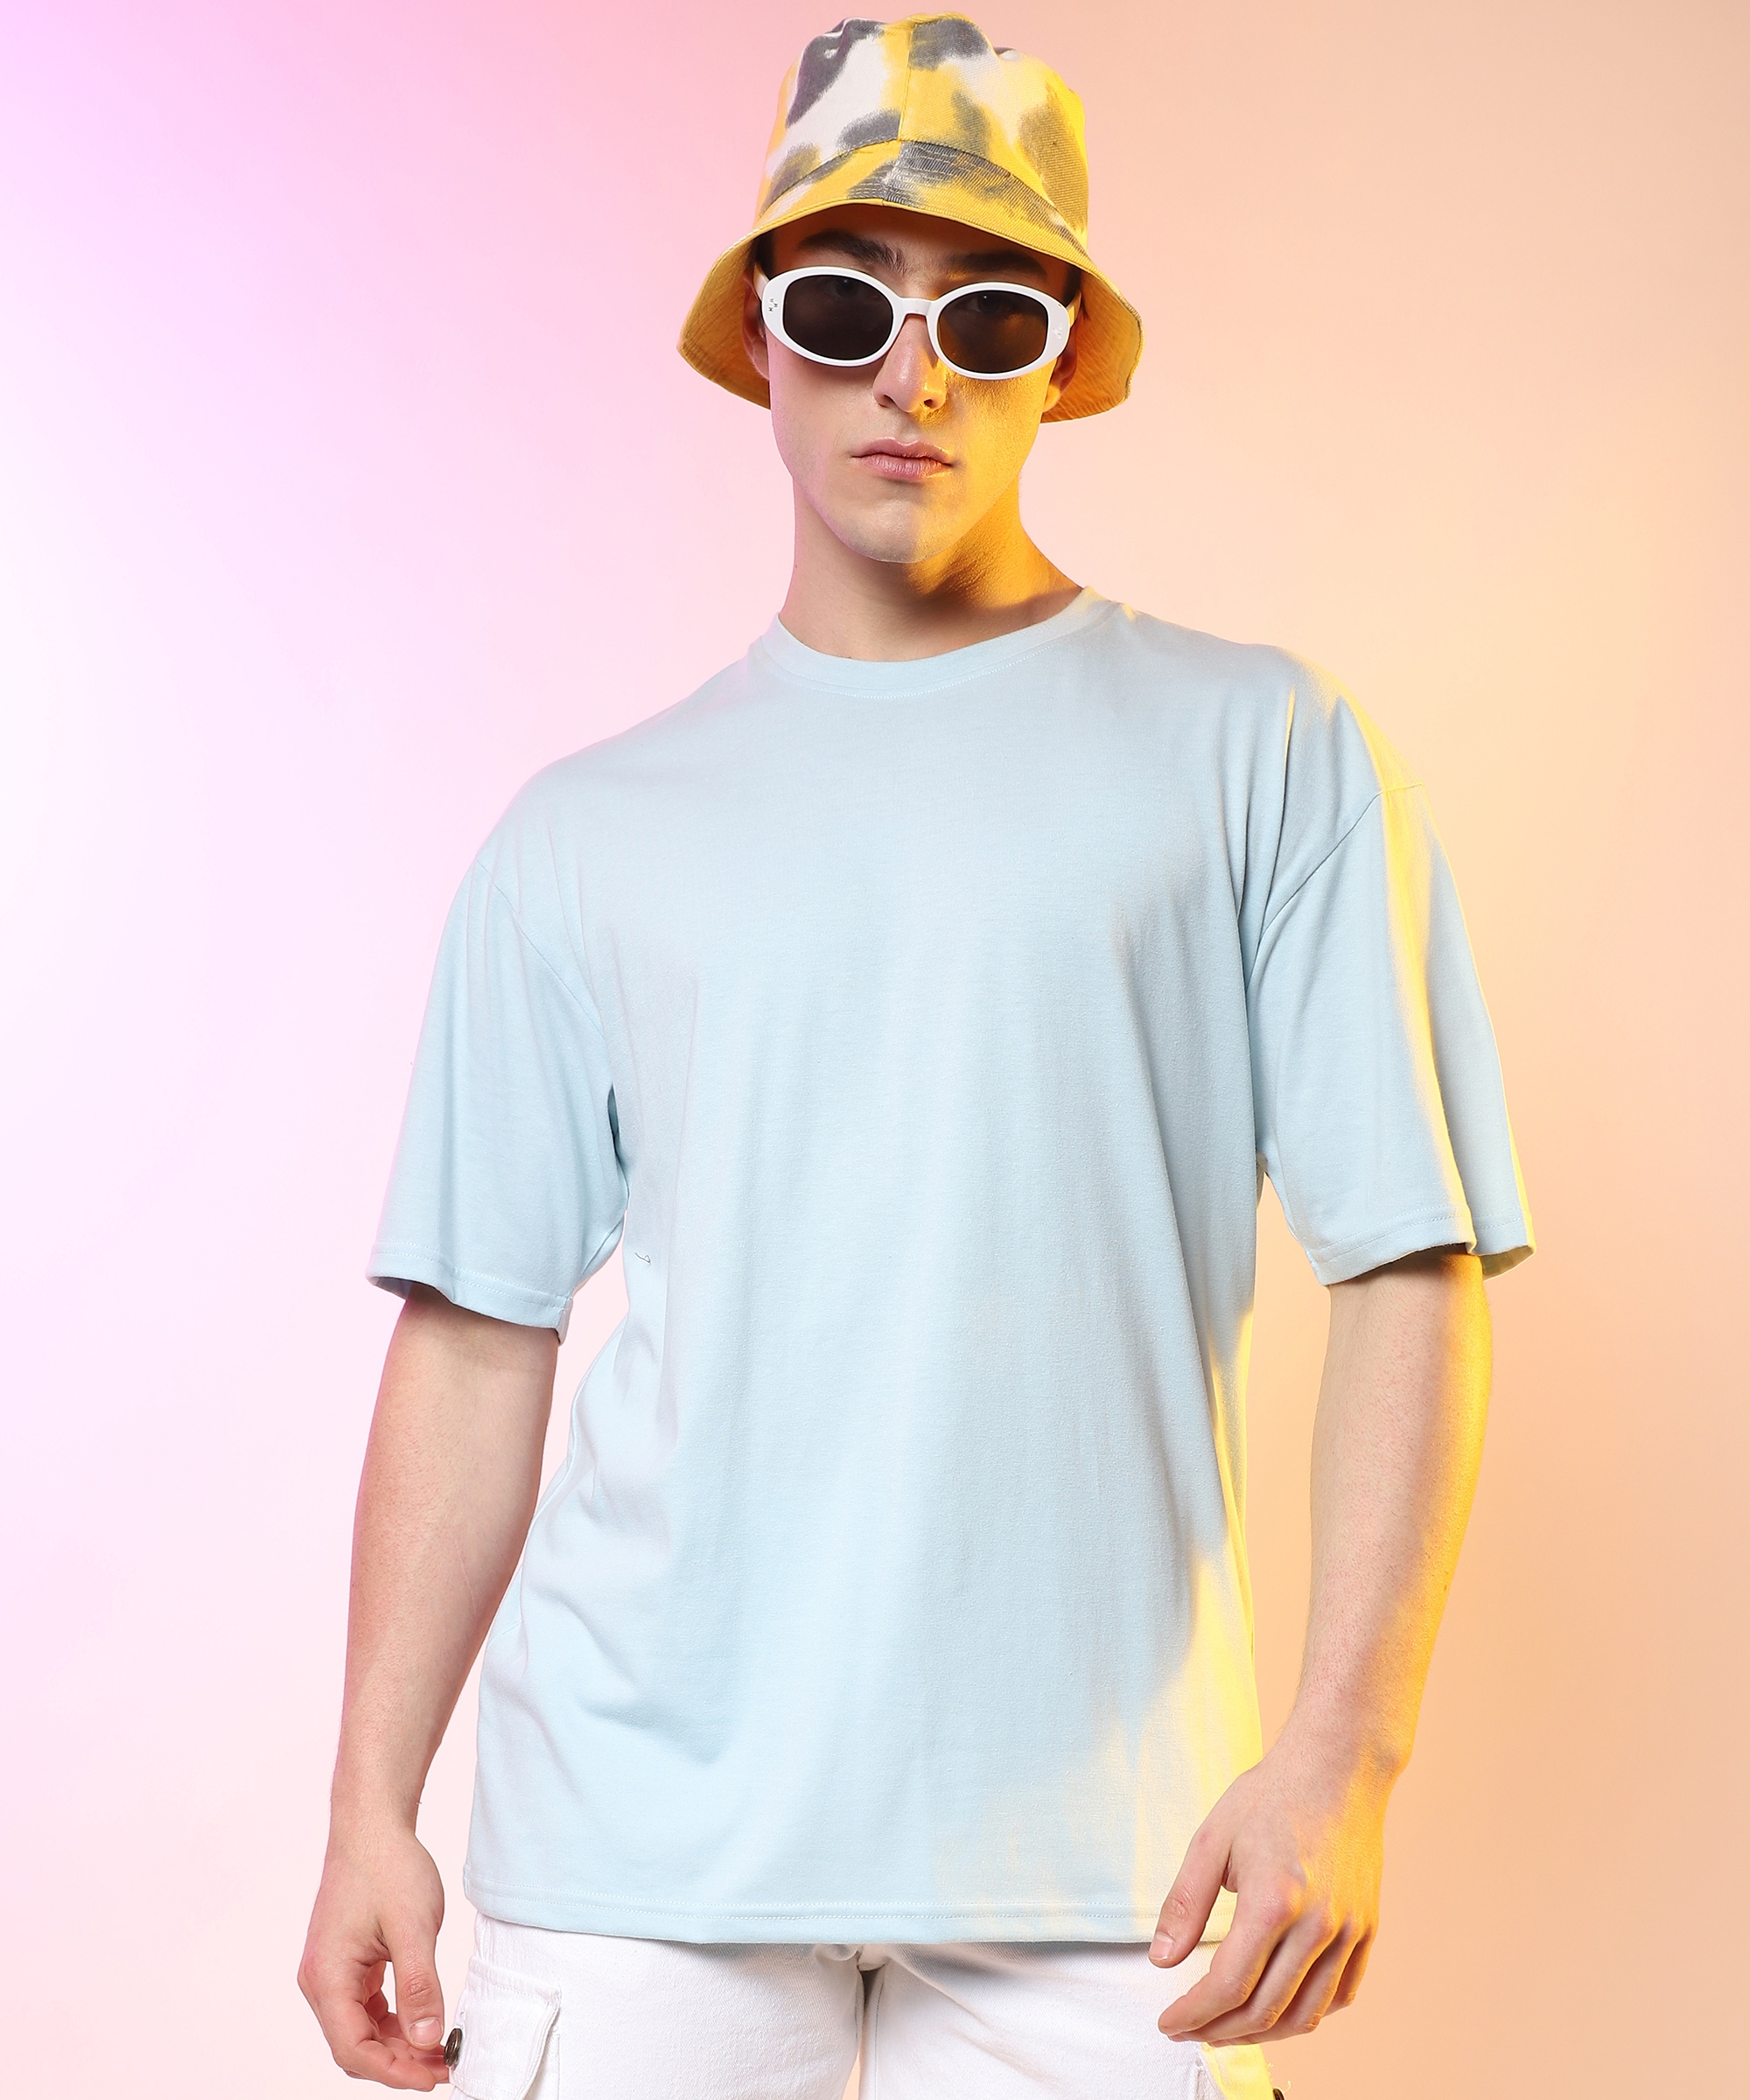 CAMPUS SUTRA | Men's Powder Blue Solid Oversized T-Shirt